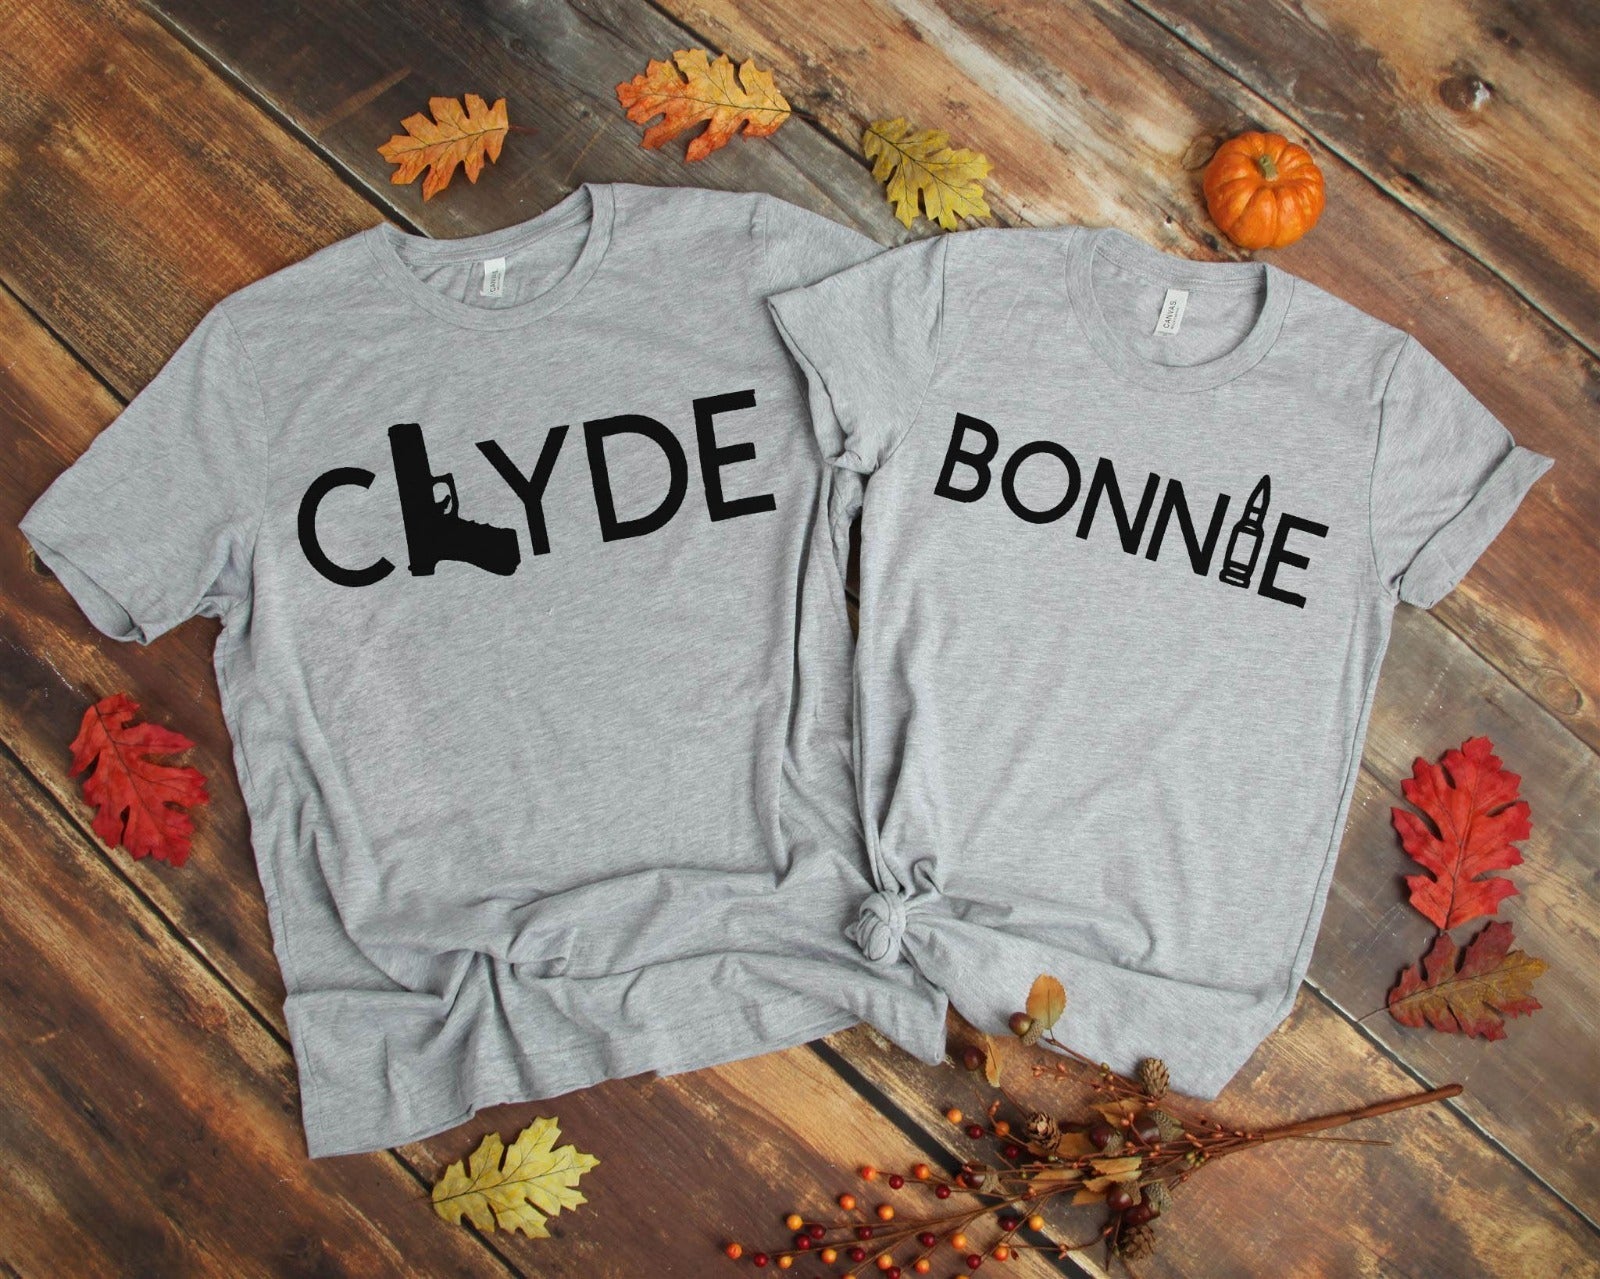 Bonnie and Clyde Couples T-shirts for Men and Women